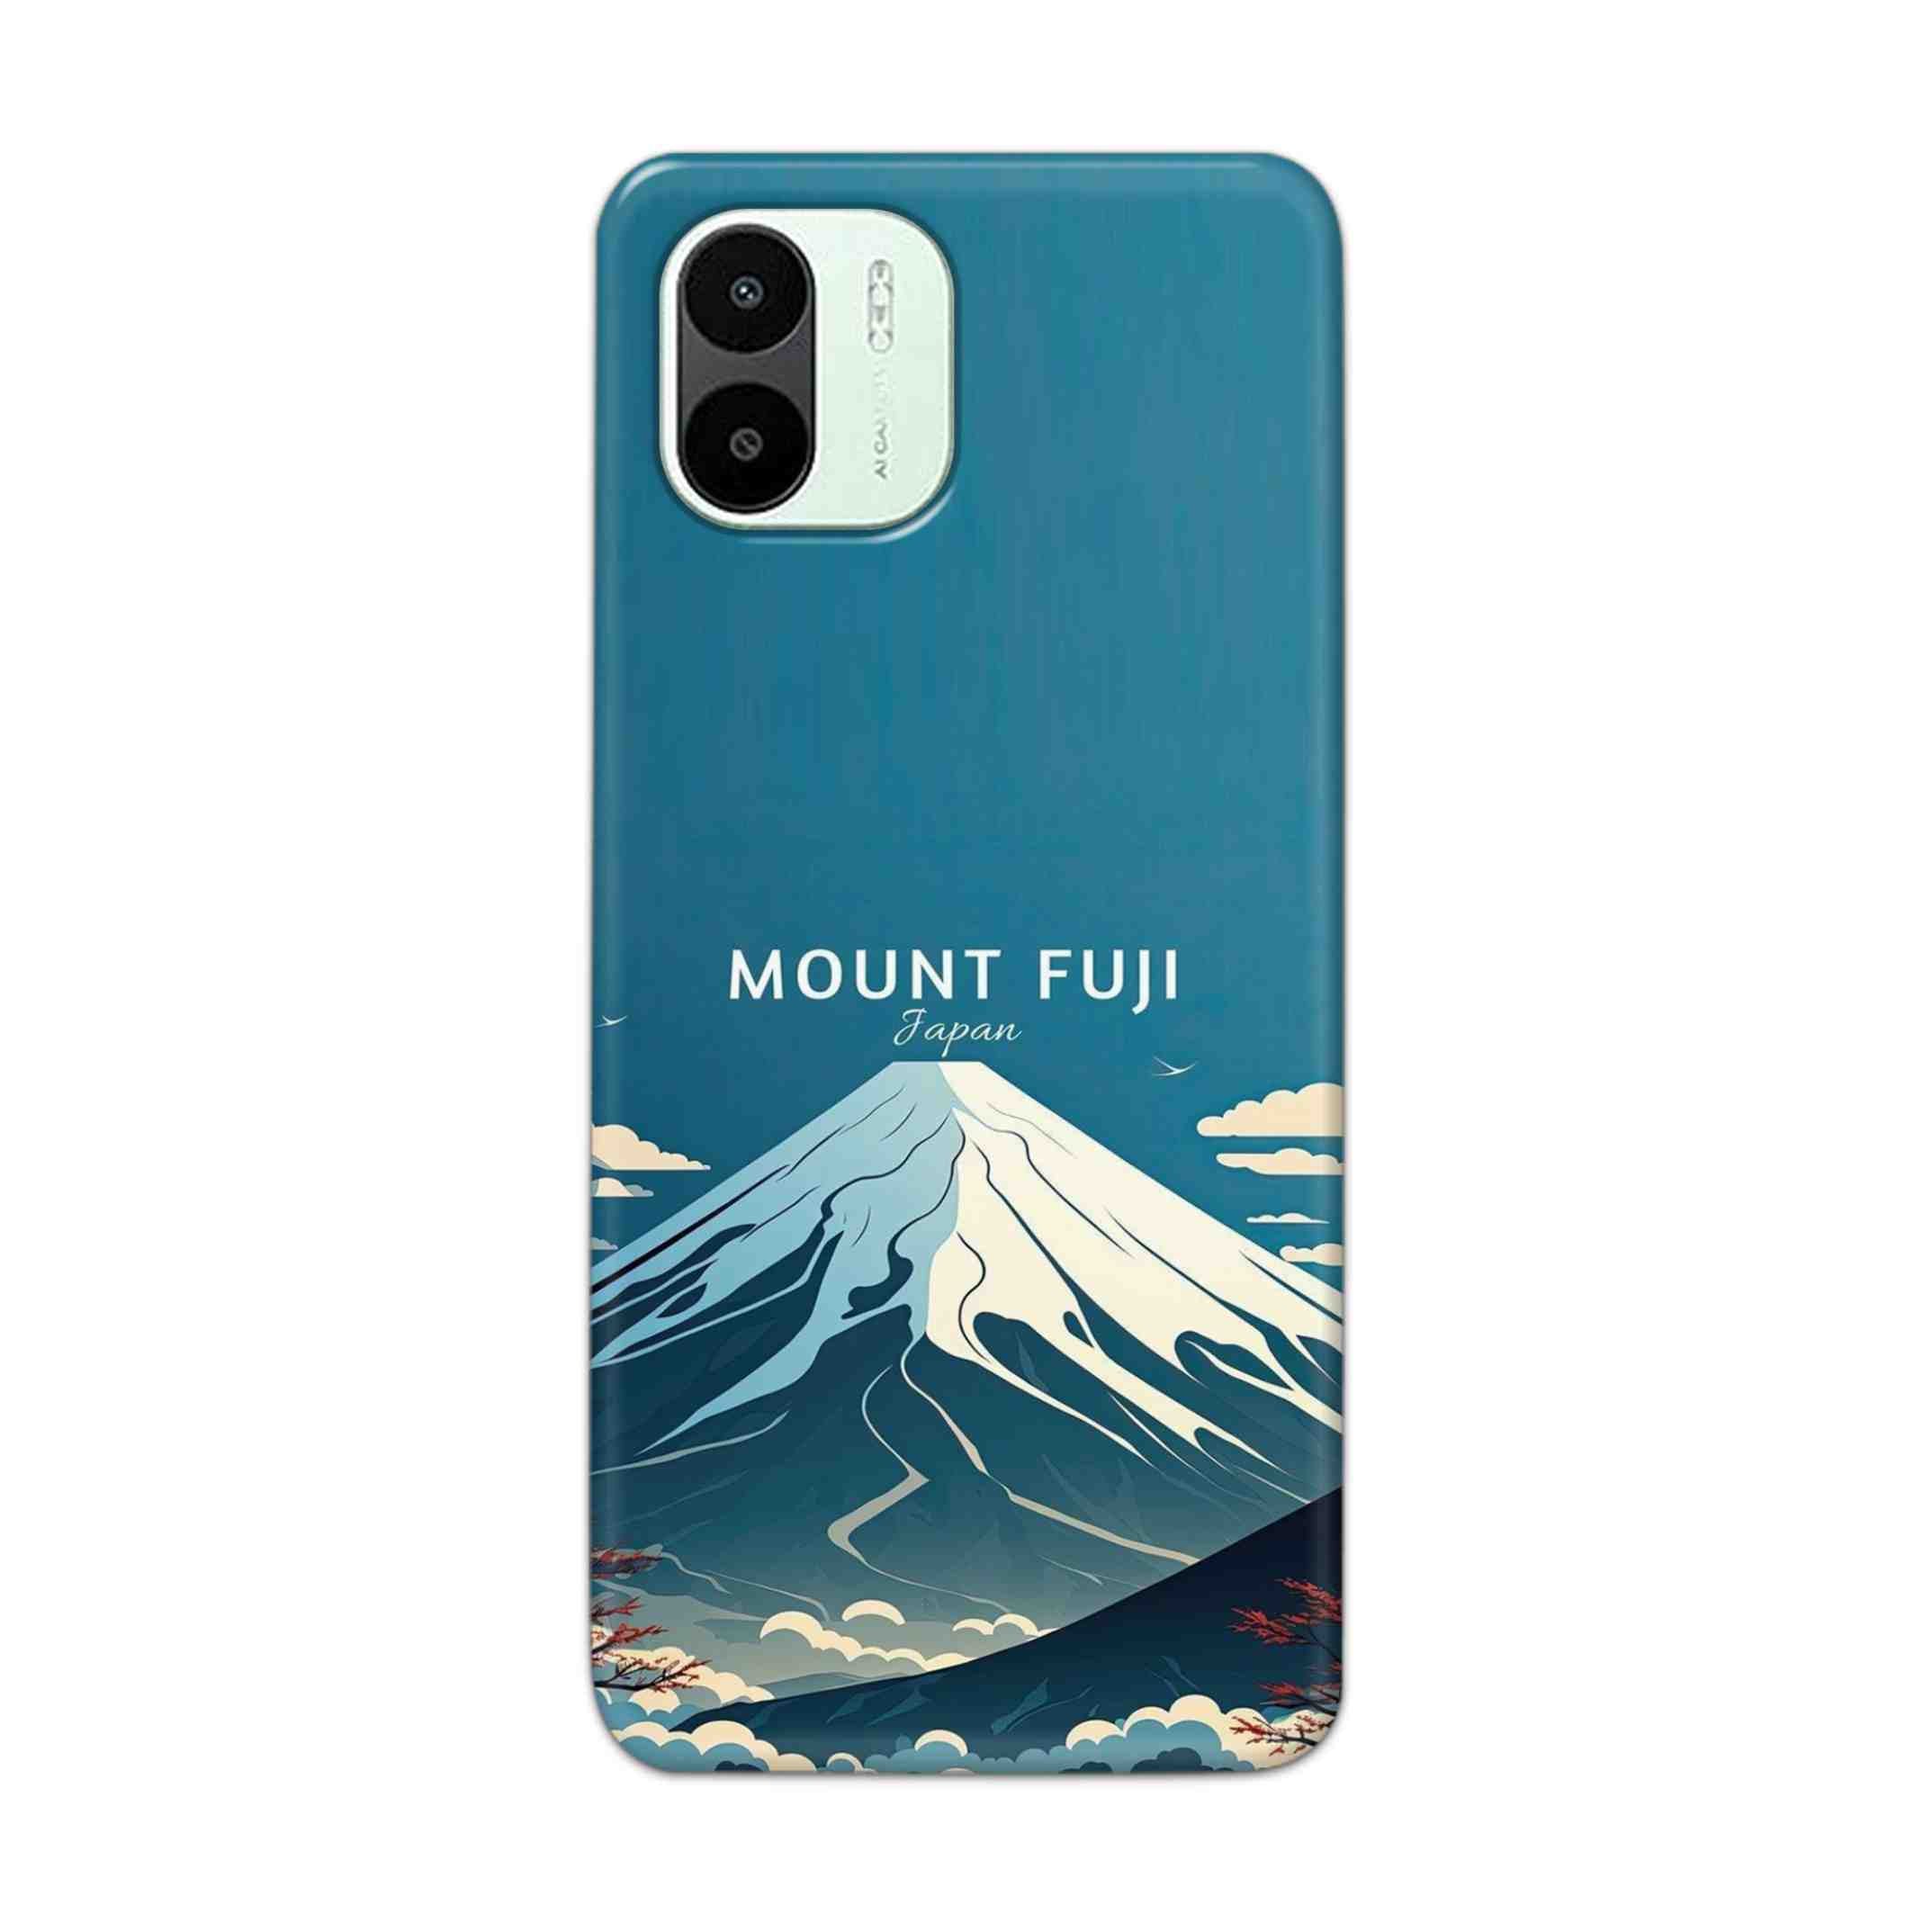 Buy Mount Fuji Hard Back Mobile Phone Case Cover For Xiaomi Redmi A1 5G Online